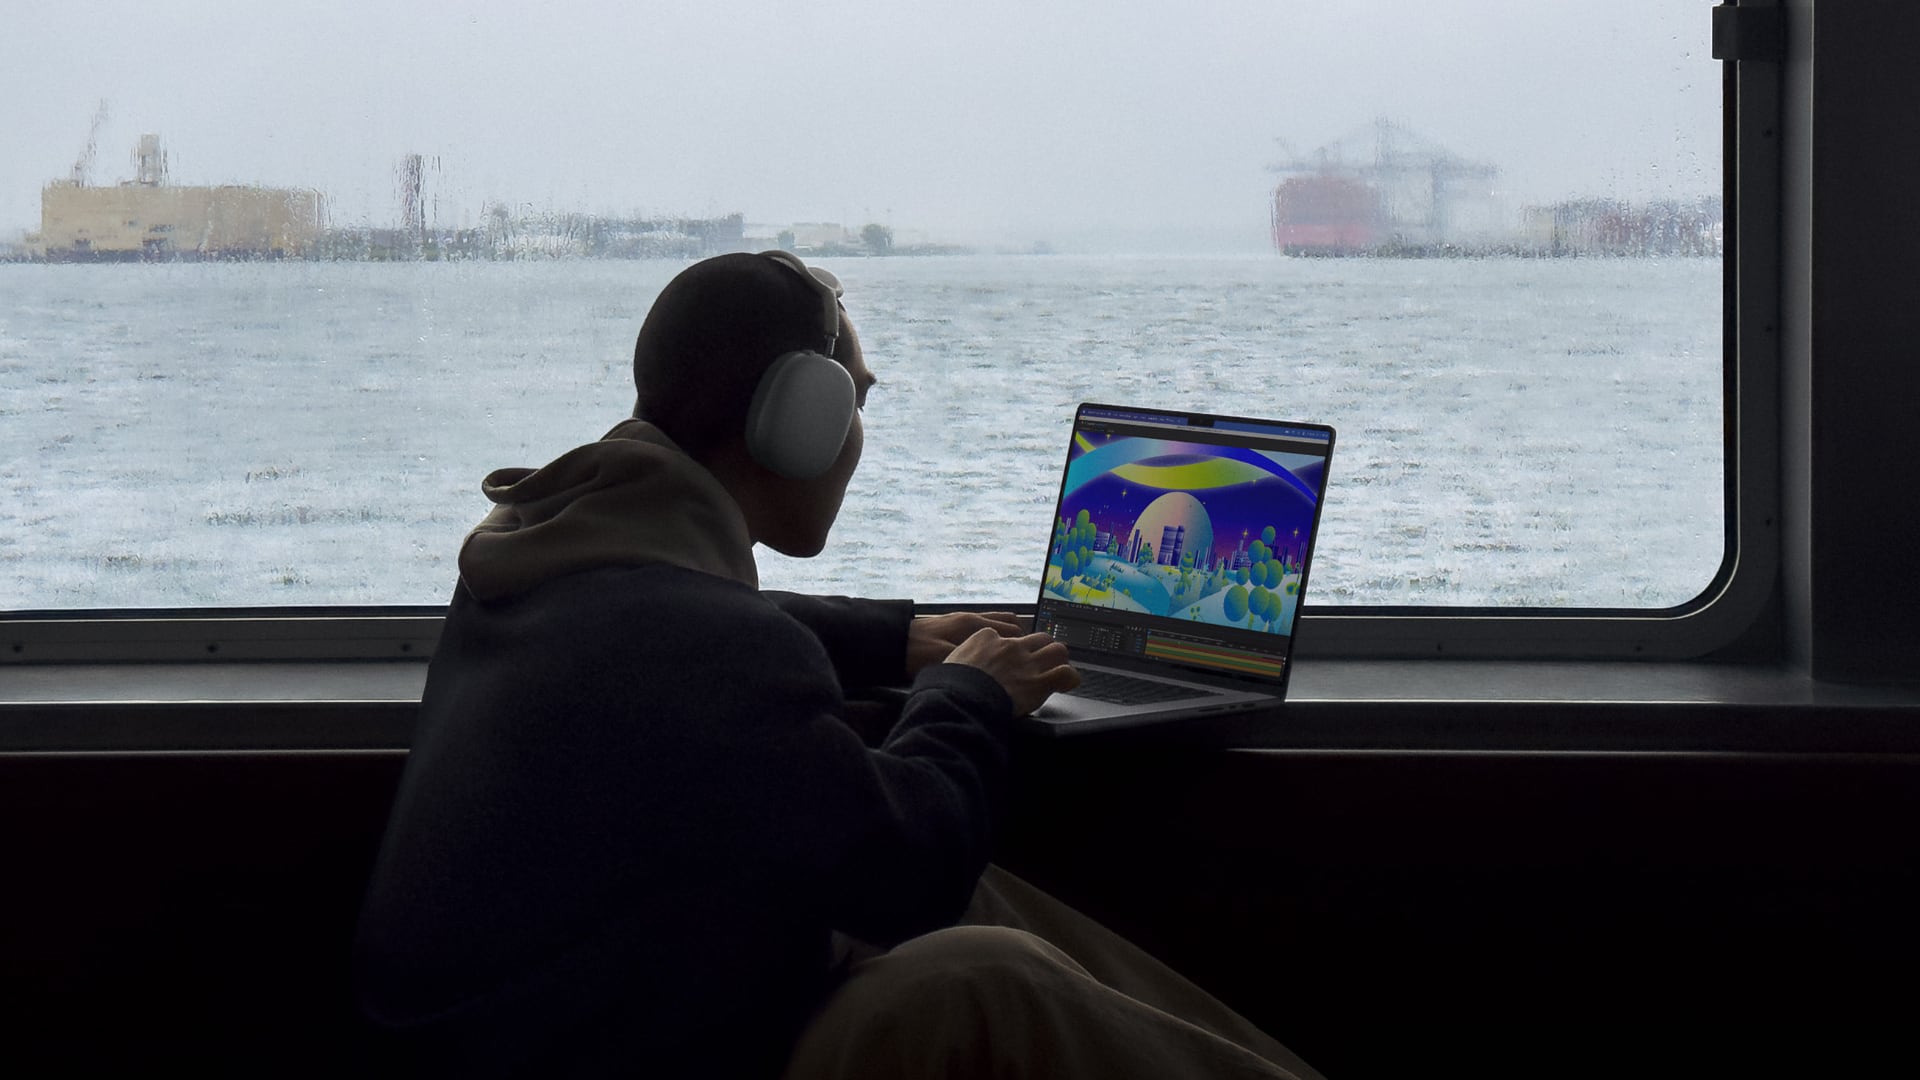 Young man on a boat on a rainy day, sitting next to a window and typing on his MacBook Pro